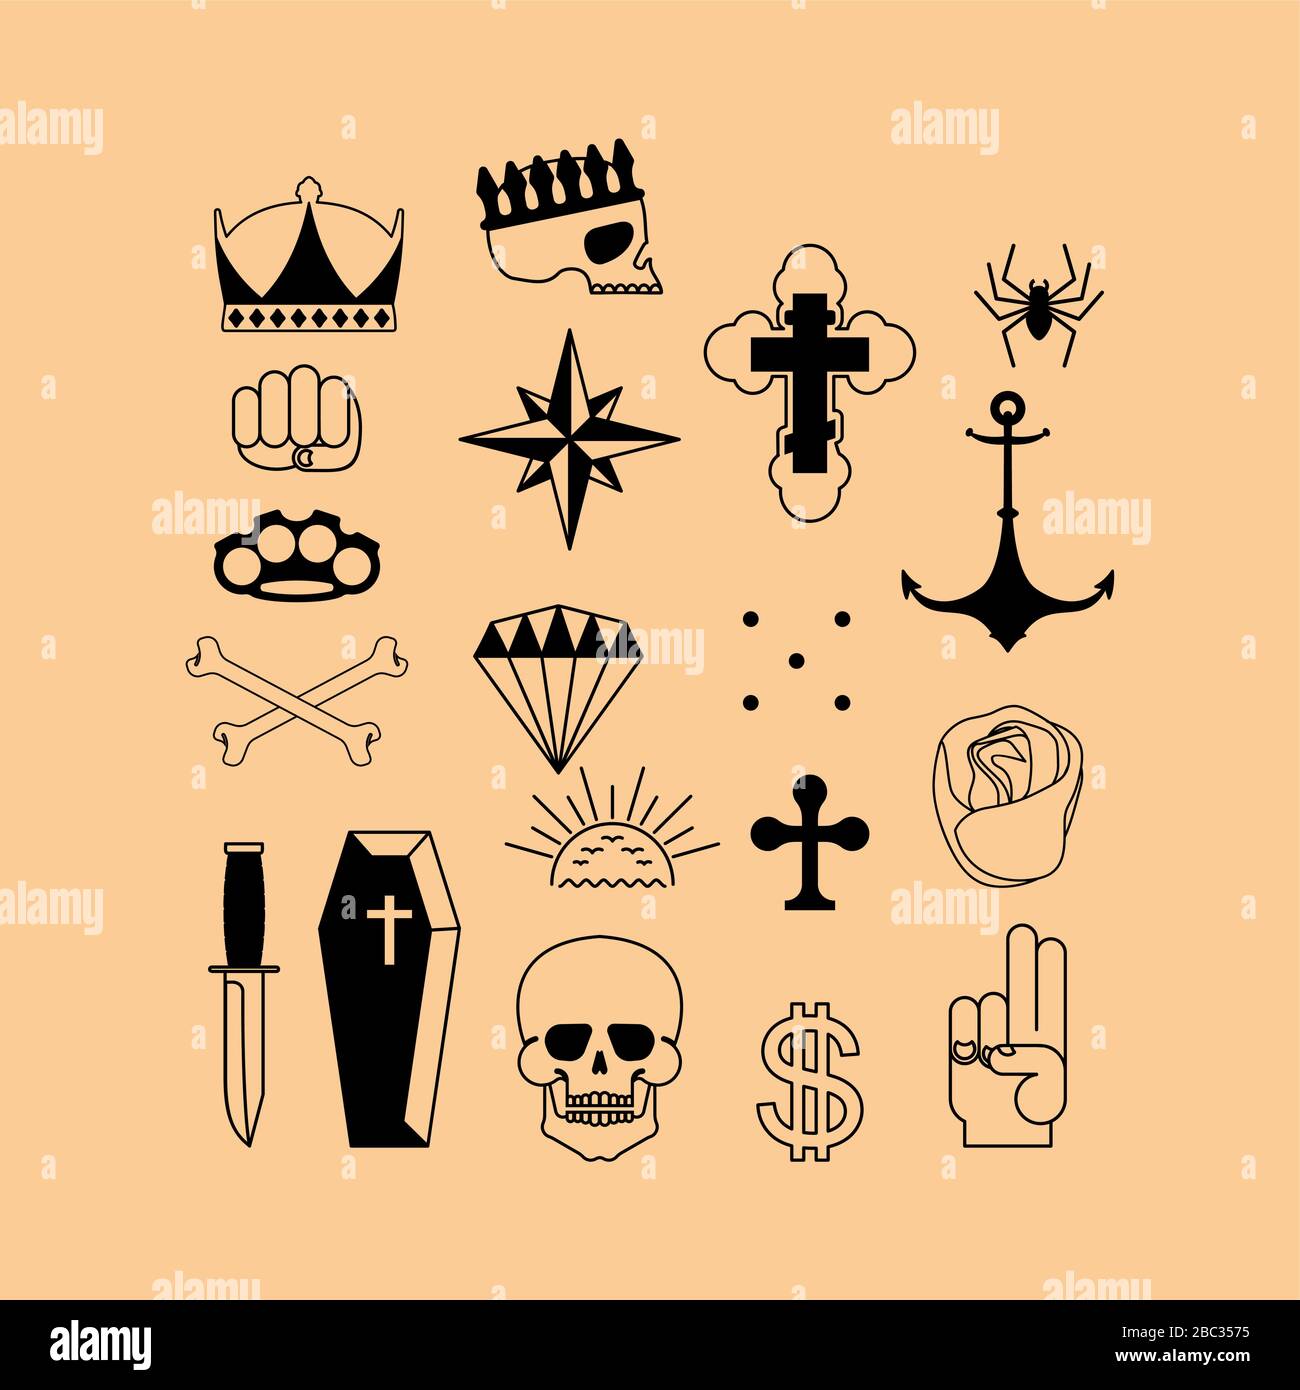 Russian prison tattoo set. Russia criminal symbol. Skull, Cross and chain. Barbed wire and crown. Thief stars. sign Prisoner mafia tattooing. Stock Vector